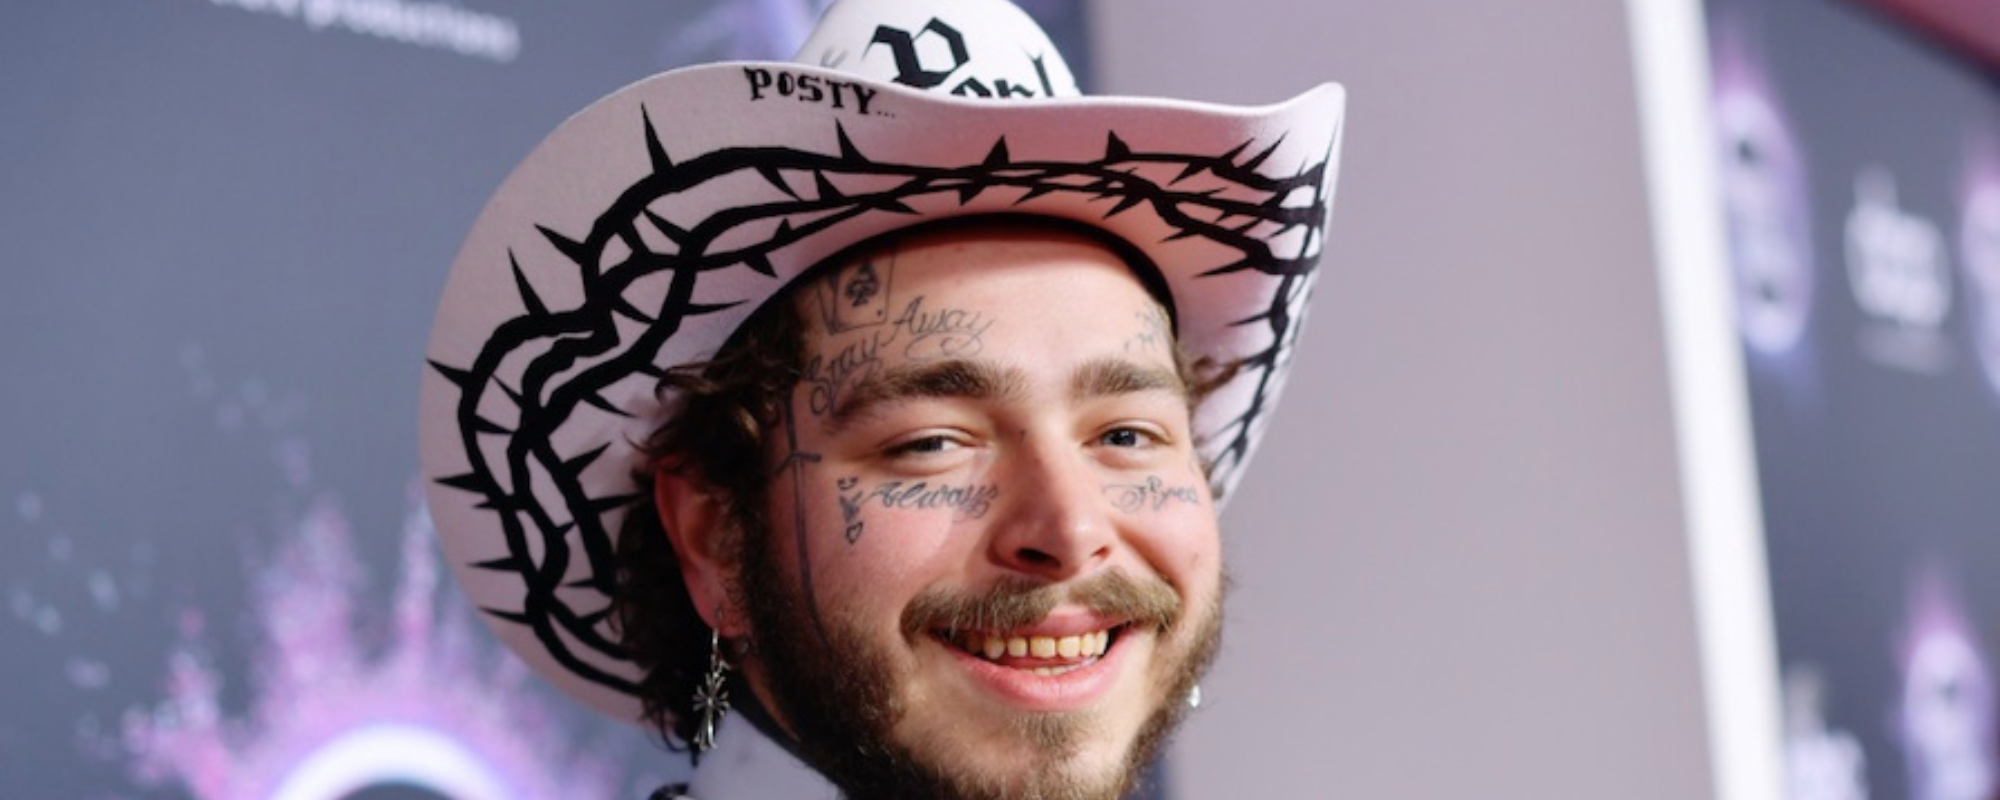 Post Malone Hits Country Charts With Joe Diffie Duet